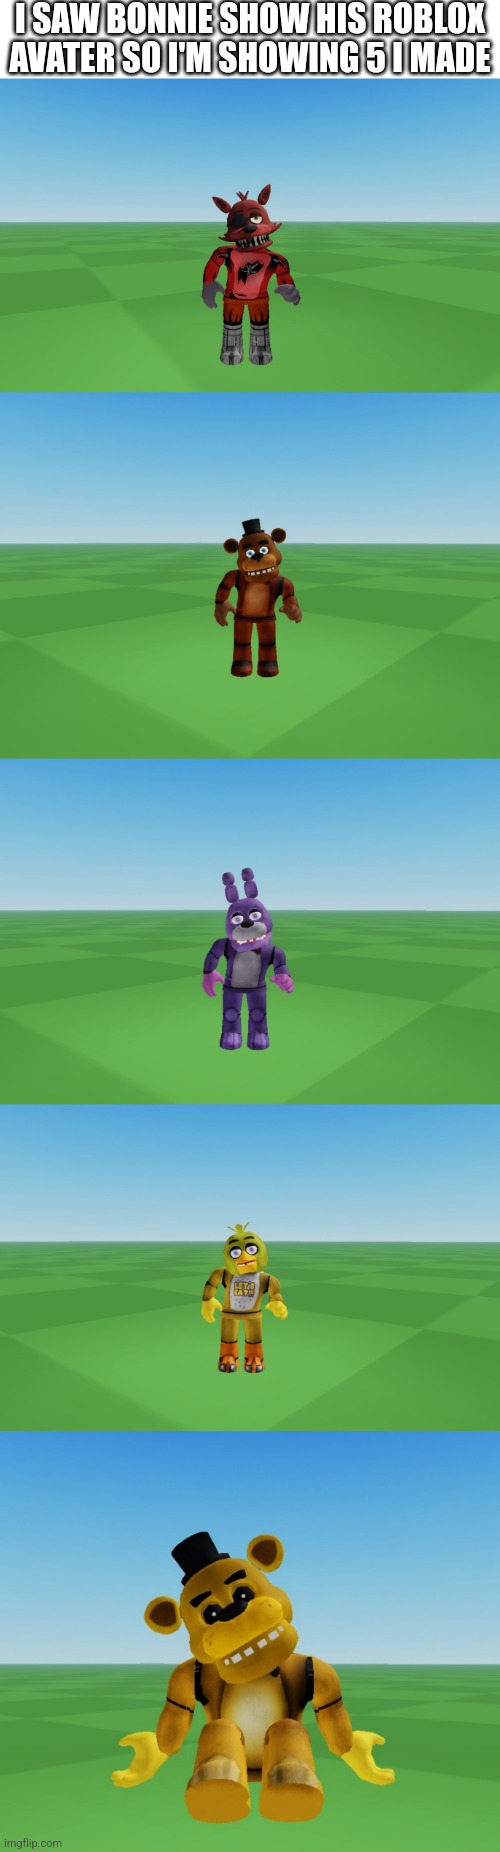 All Of Them Are Mine | I SAW BONNIE SHOW HIS ROBLOX AVATER SO I'M SHOWING 5 I MADE | image tagged in fnaf,roblox | made w/ Imgflip meme maker